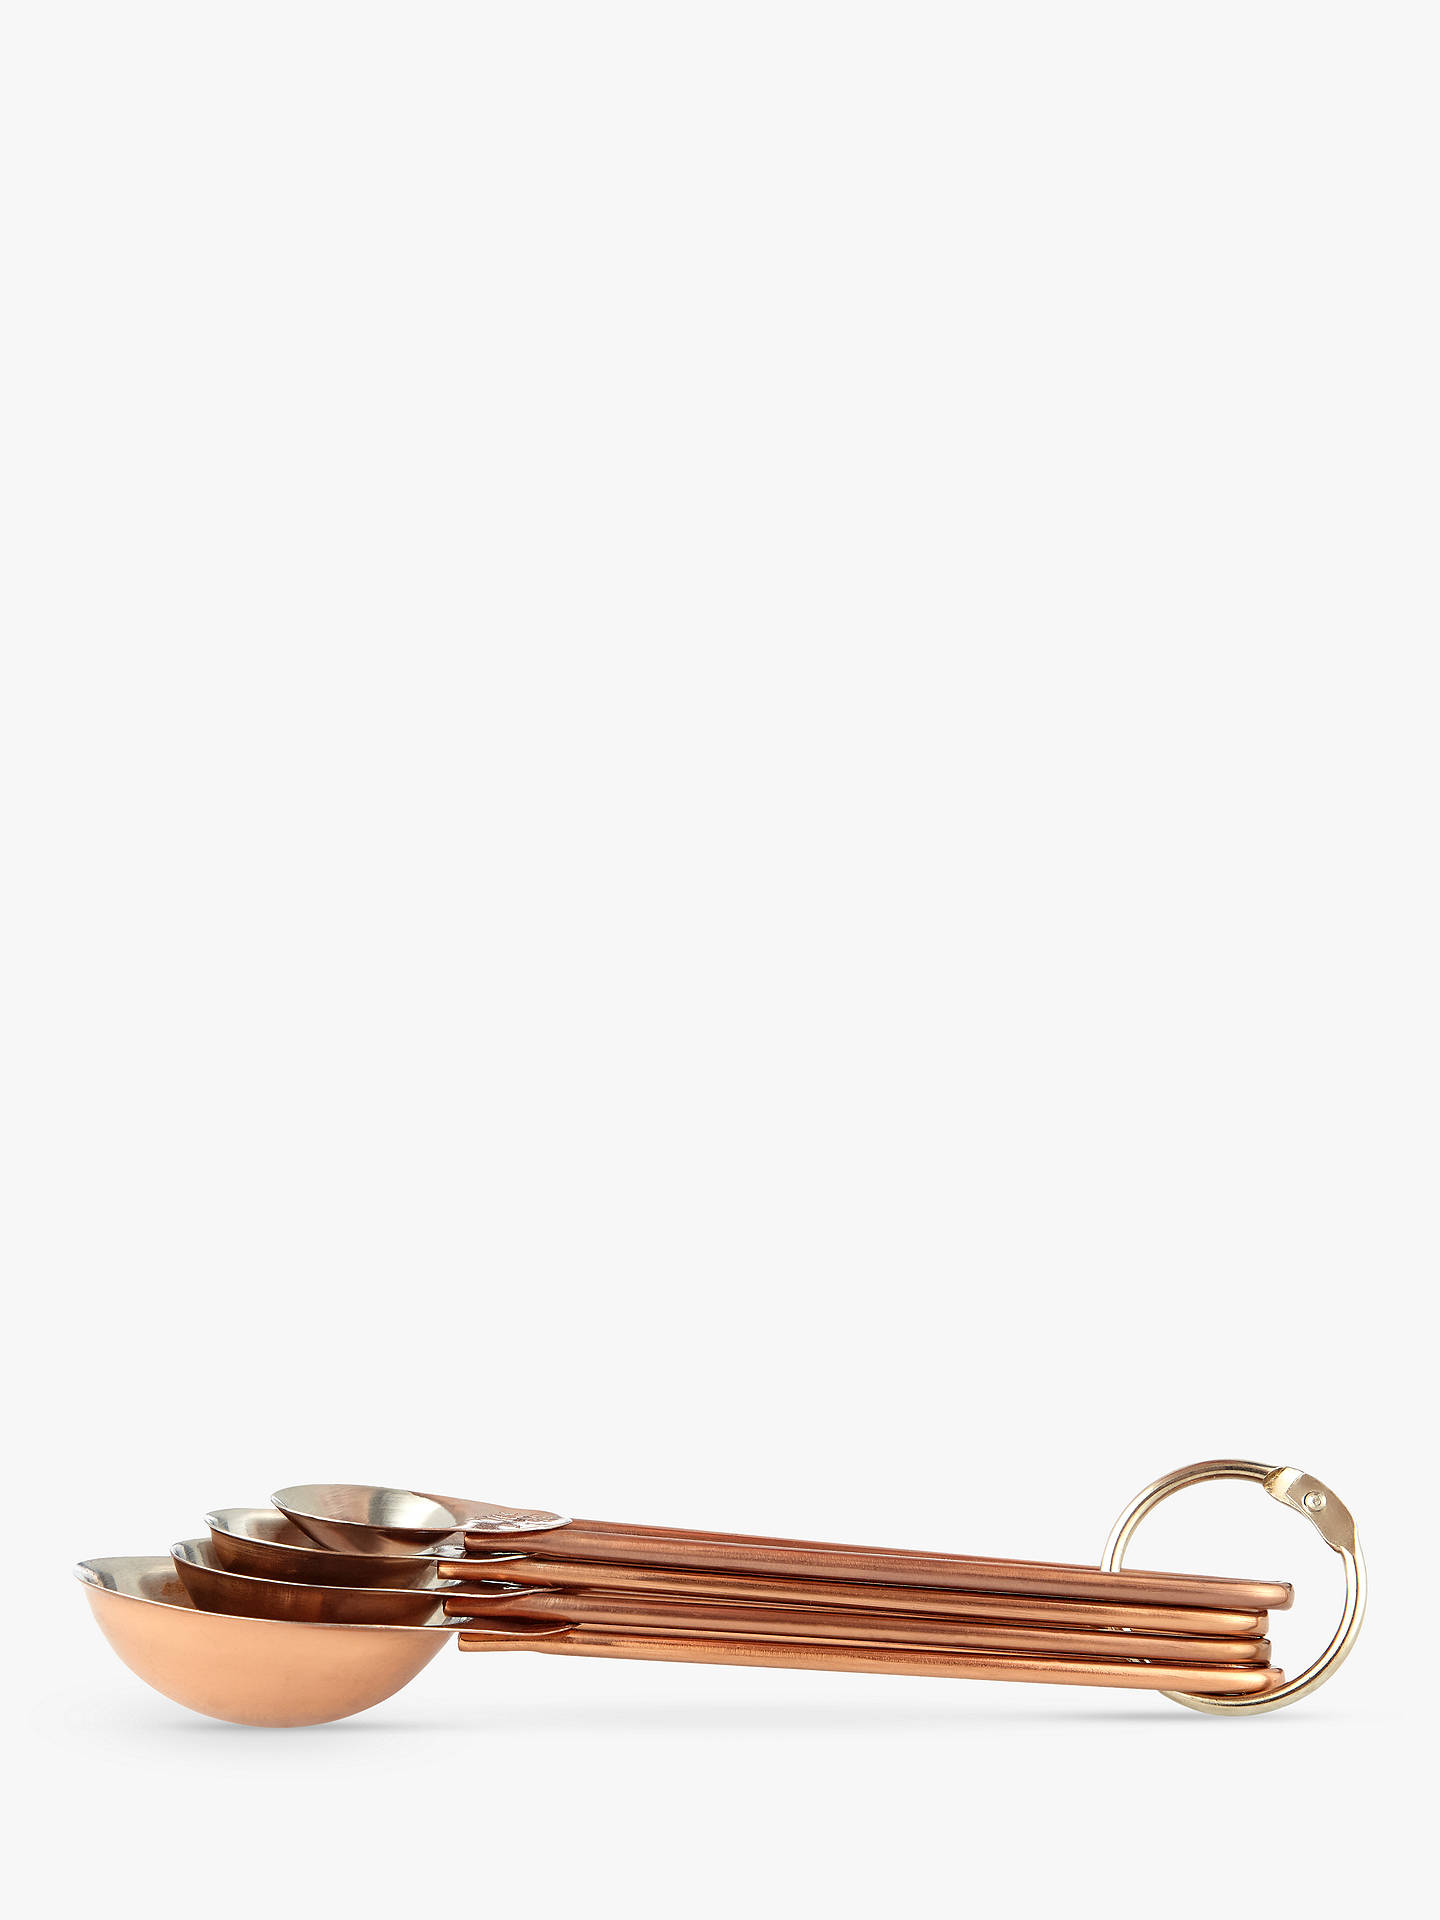 BuyCroft Collection Copper Measuring Spoon, Set of 4 Online at johnlewis.com